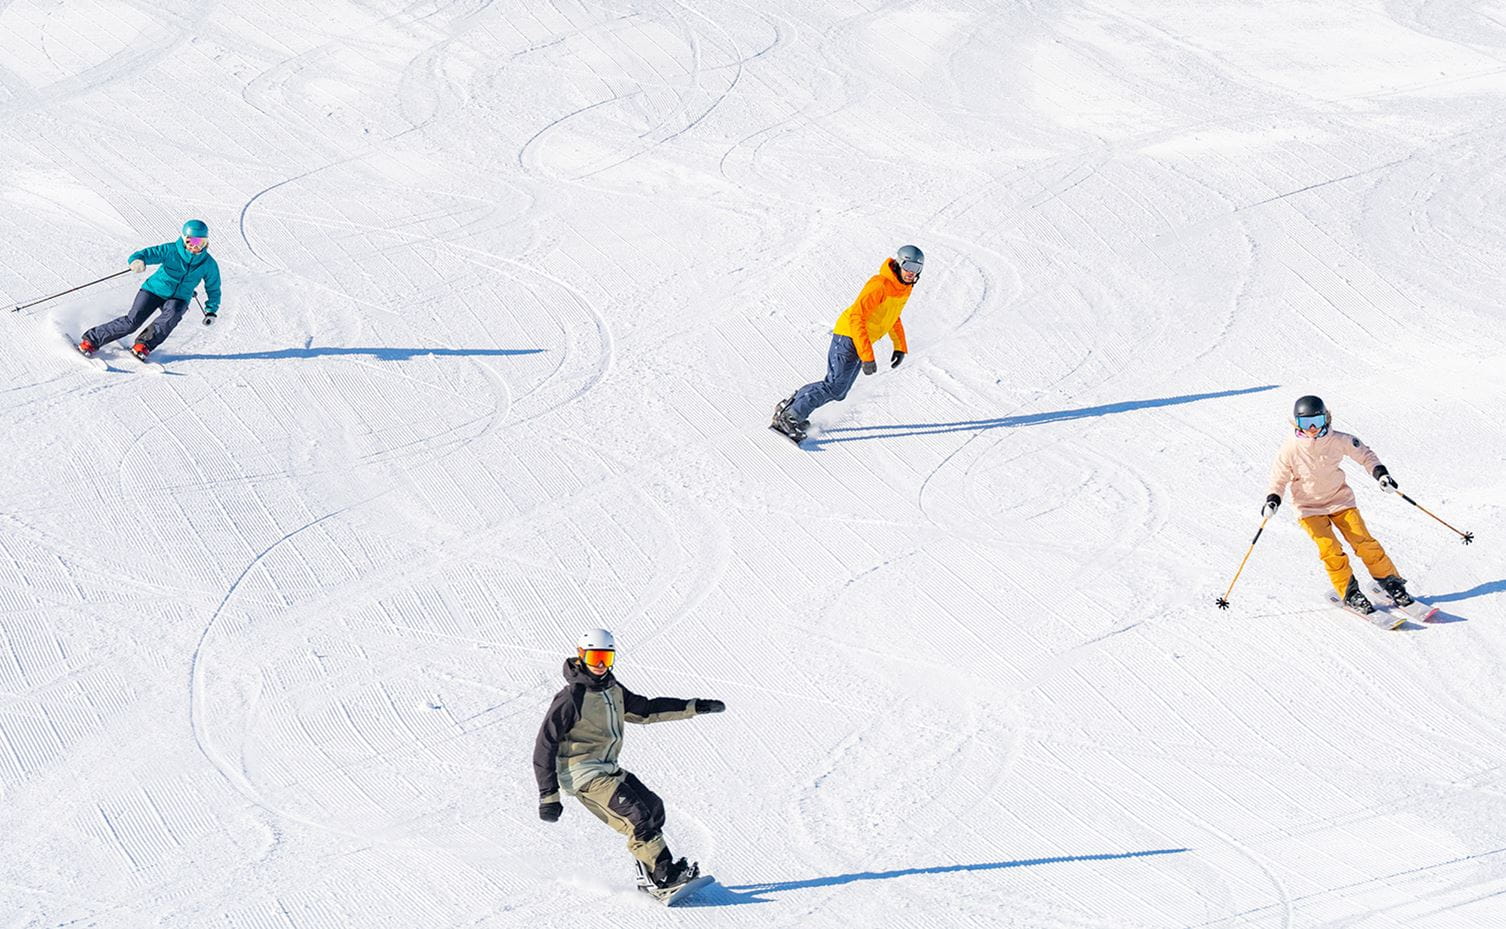 Three skiers and a snowboarder descend the slopes at Aspen Snowmass